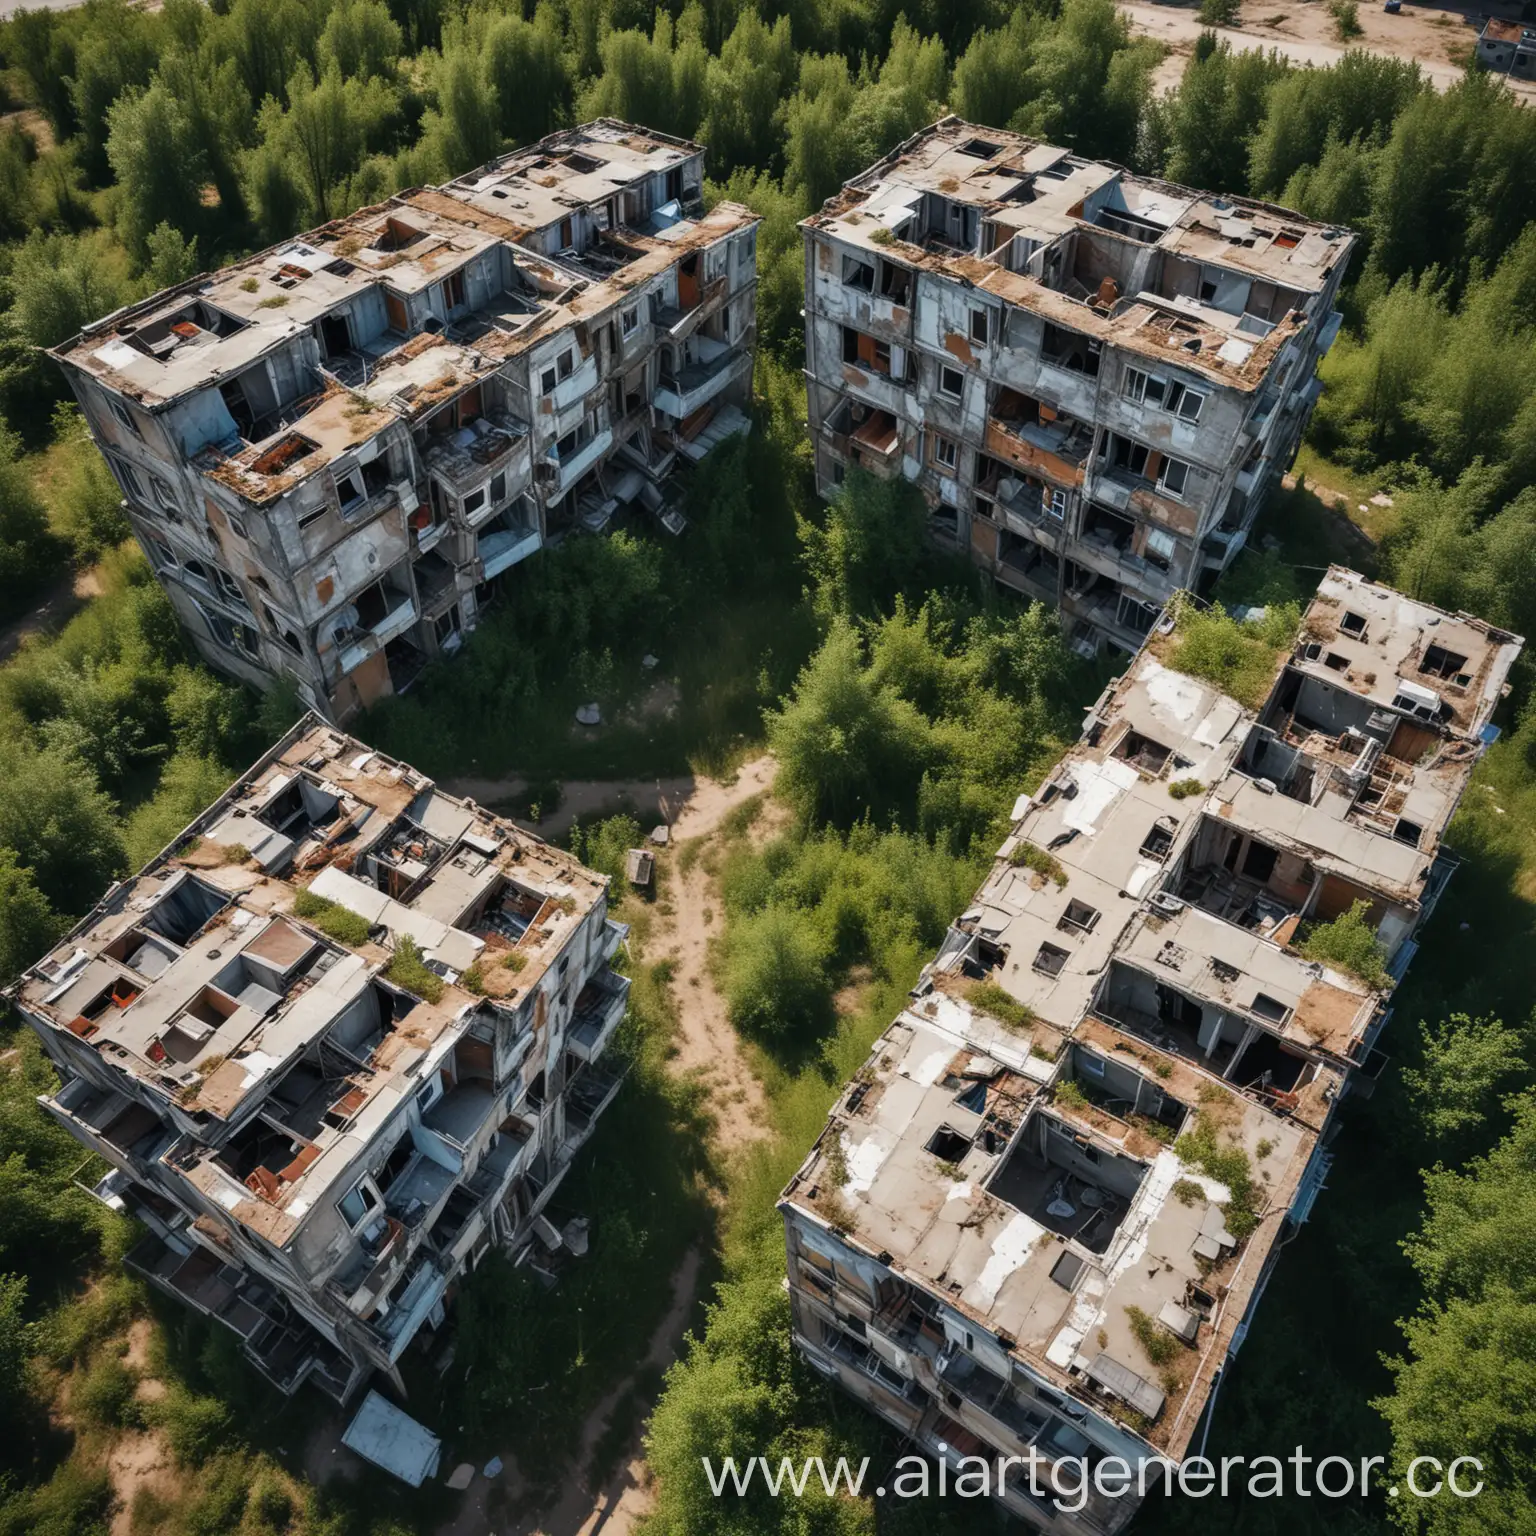 five short multi-storey houses, abandoned houses, abandoned children's camp, summer, bird's eye view, drone view, realistic photo, suspense